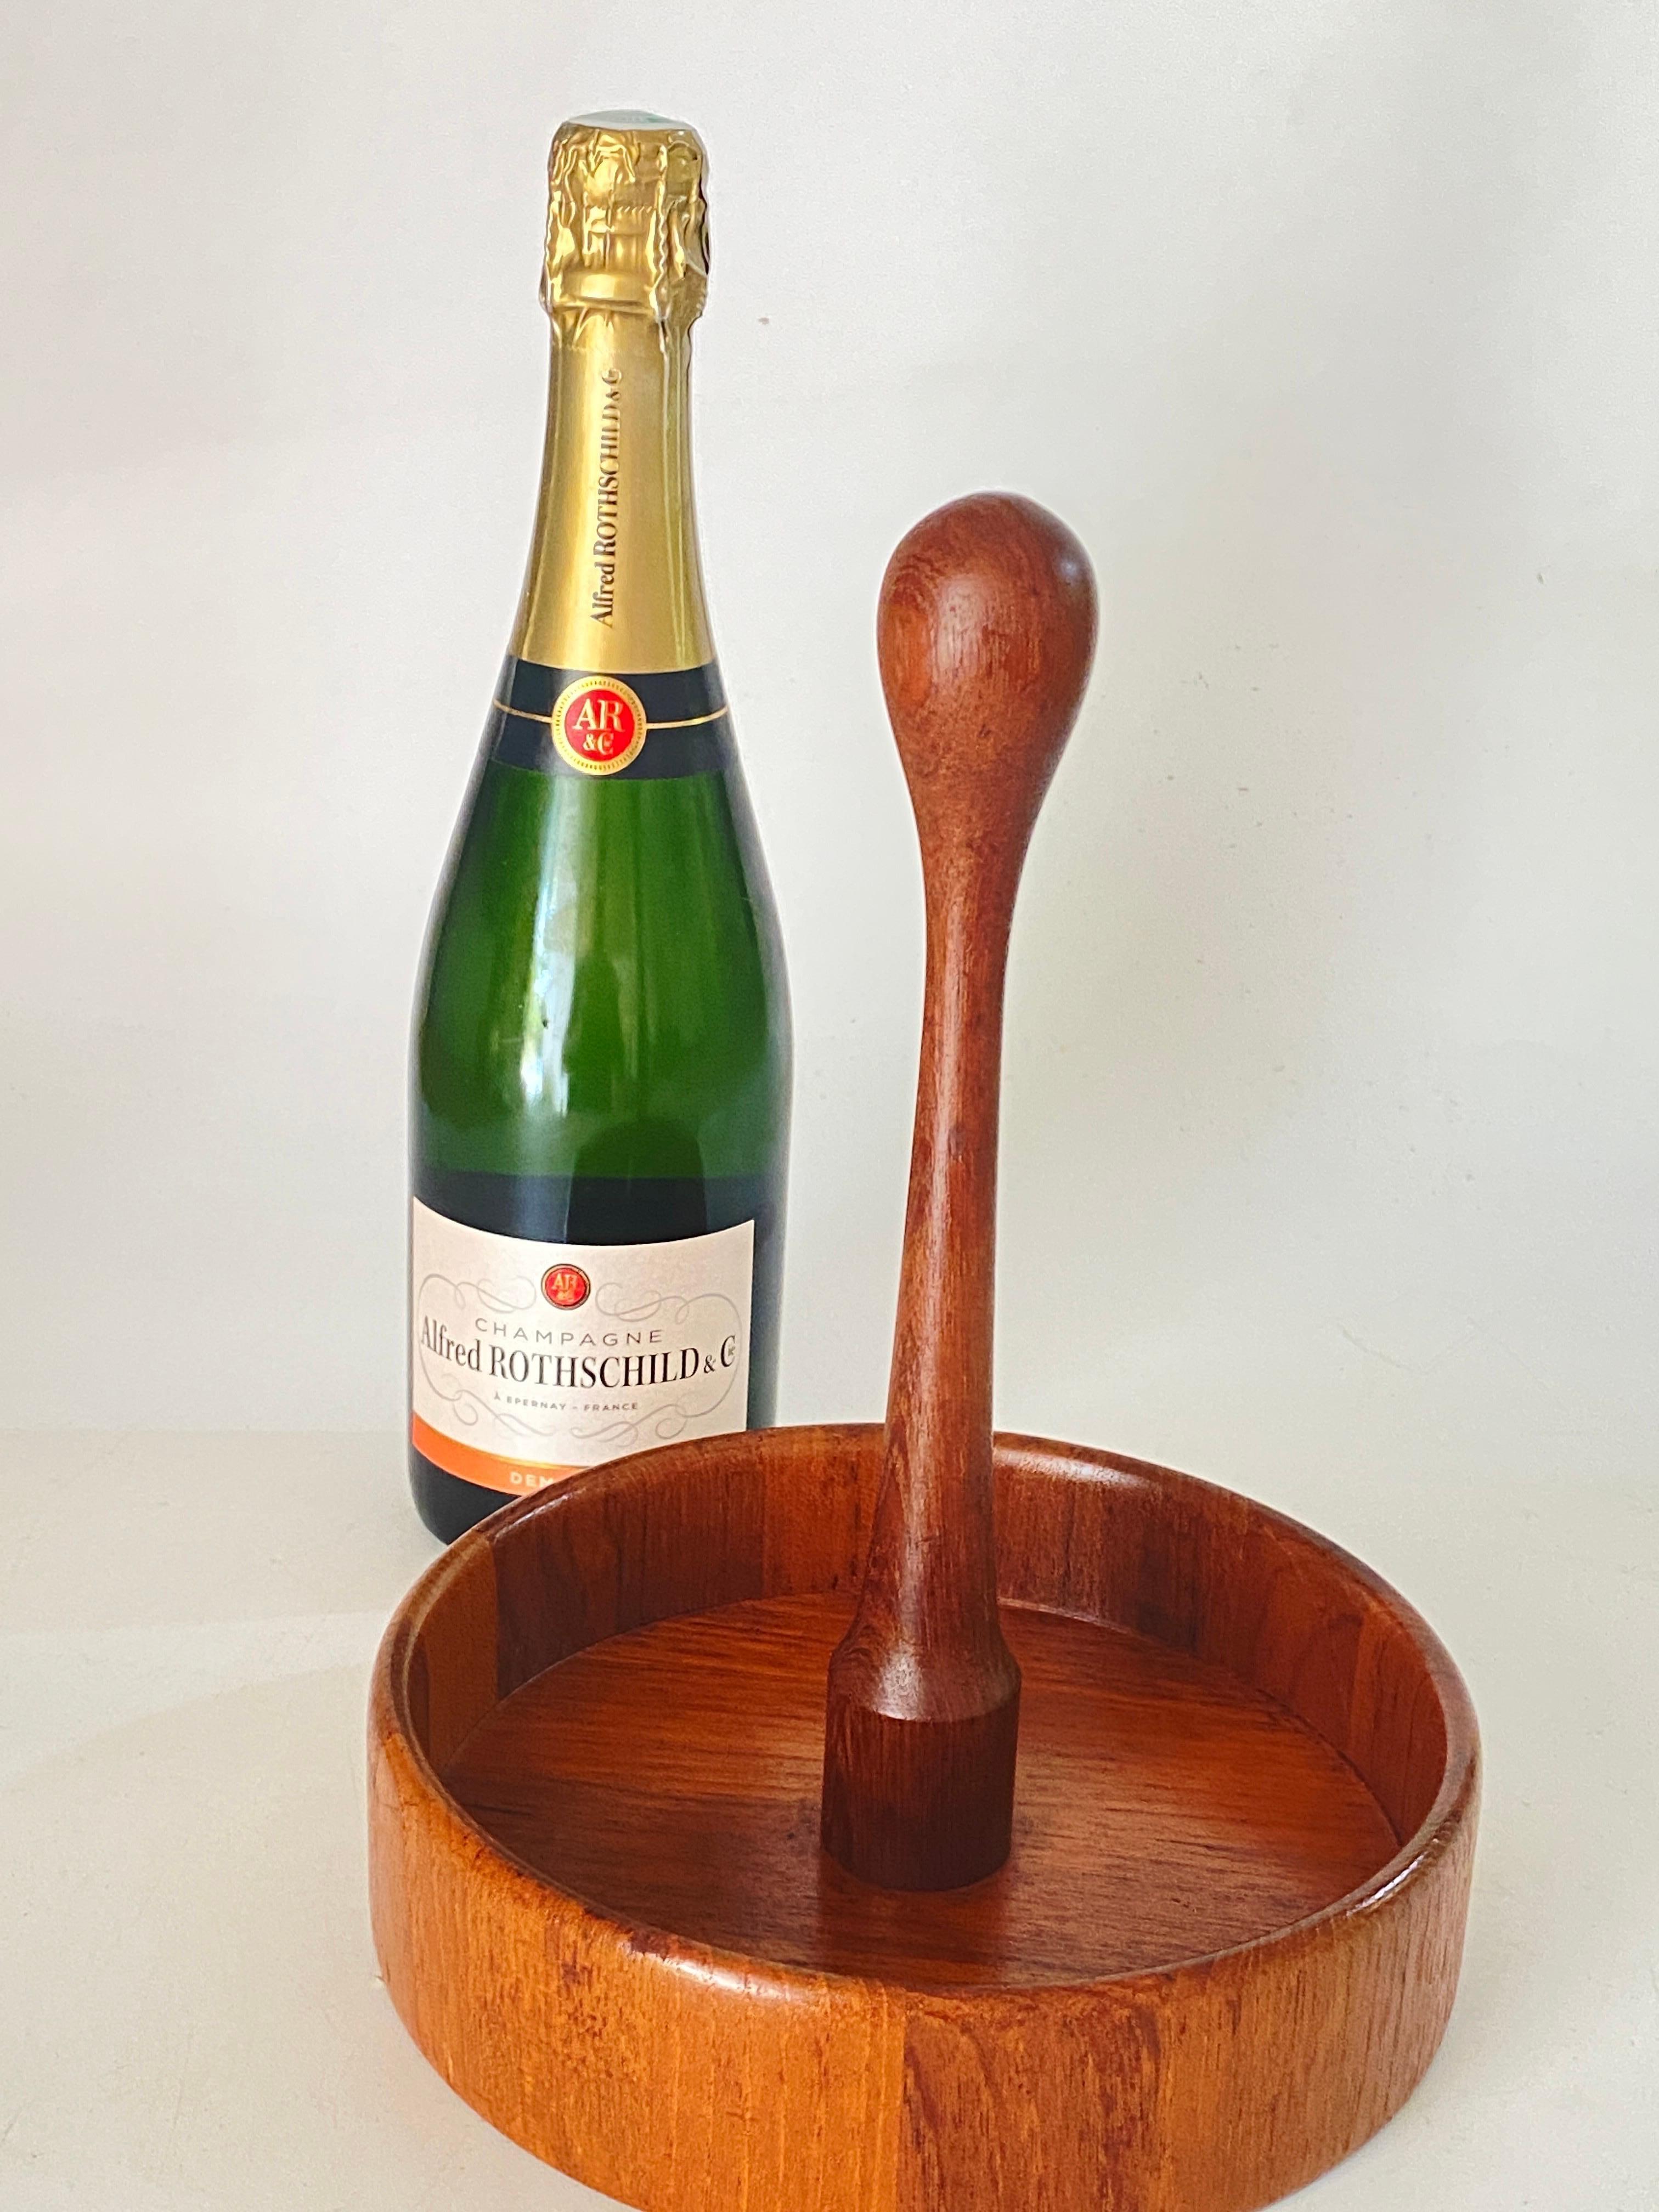 Mid-20th Century Spice Tray in Wood Denmark 1960s Brown Color with a wooden handle For Sale